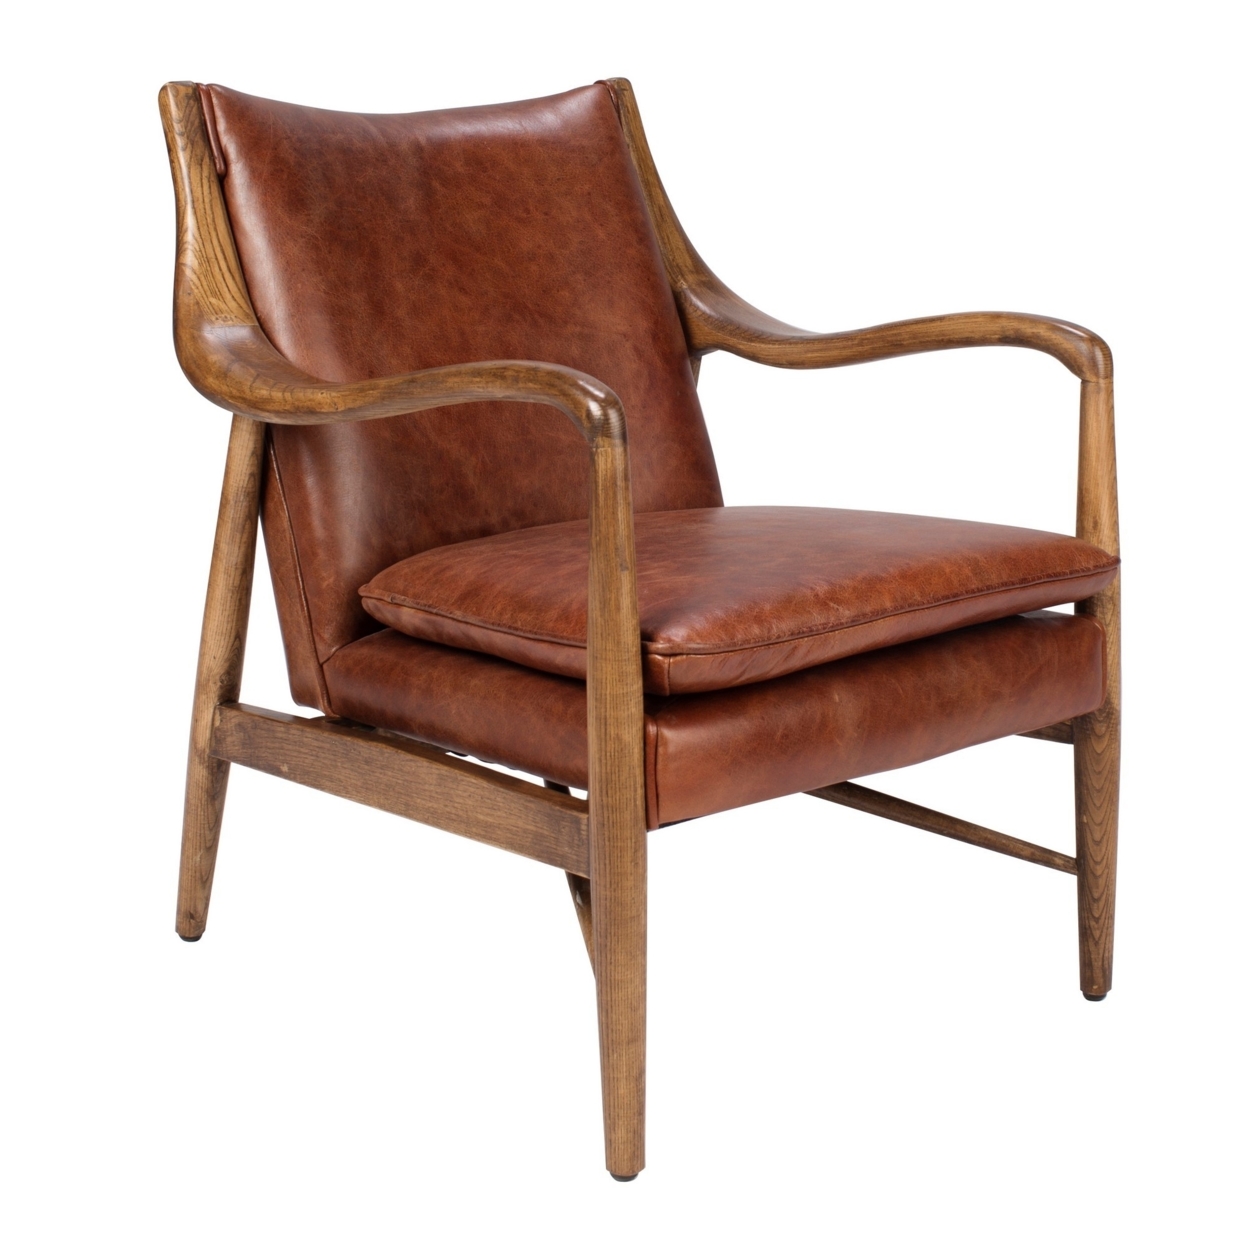 29 Inch Classic Wood Club Chair, Top Grain Leather Seat, Curved Arms, Brown- Saltoro Sherpi